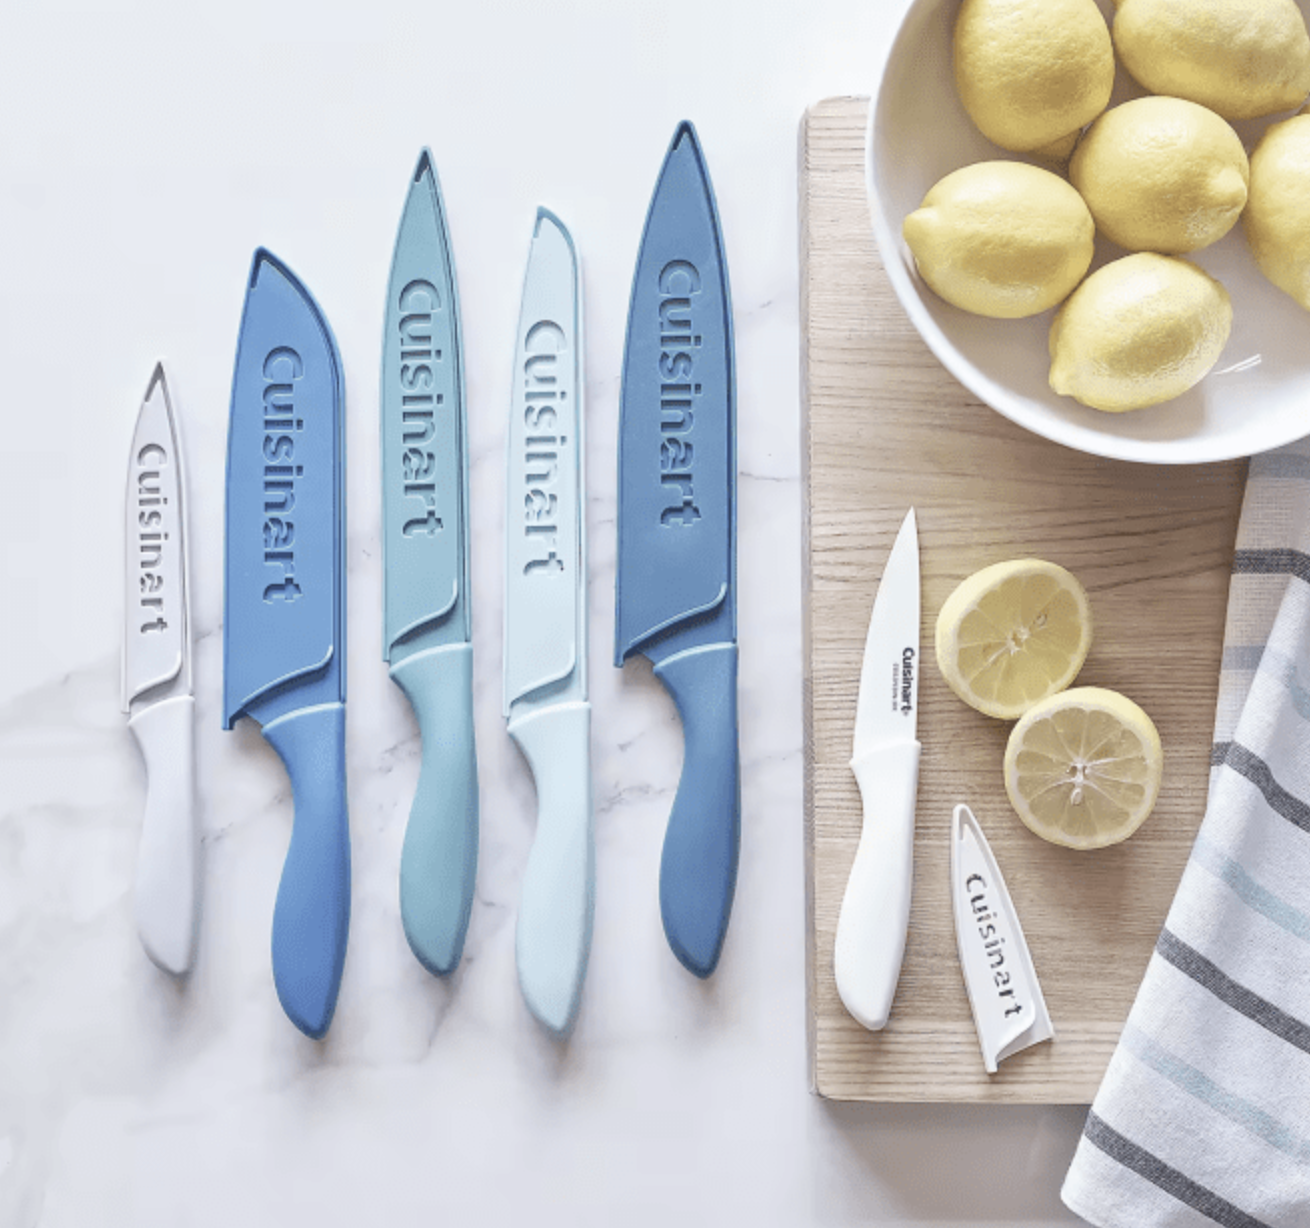 Cuisinart Benefit 6-Piece Ceramic-Coated Nautical Knife Set for simply $19 shipped! (Reg. $65)